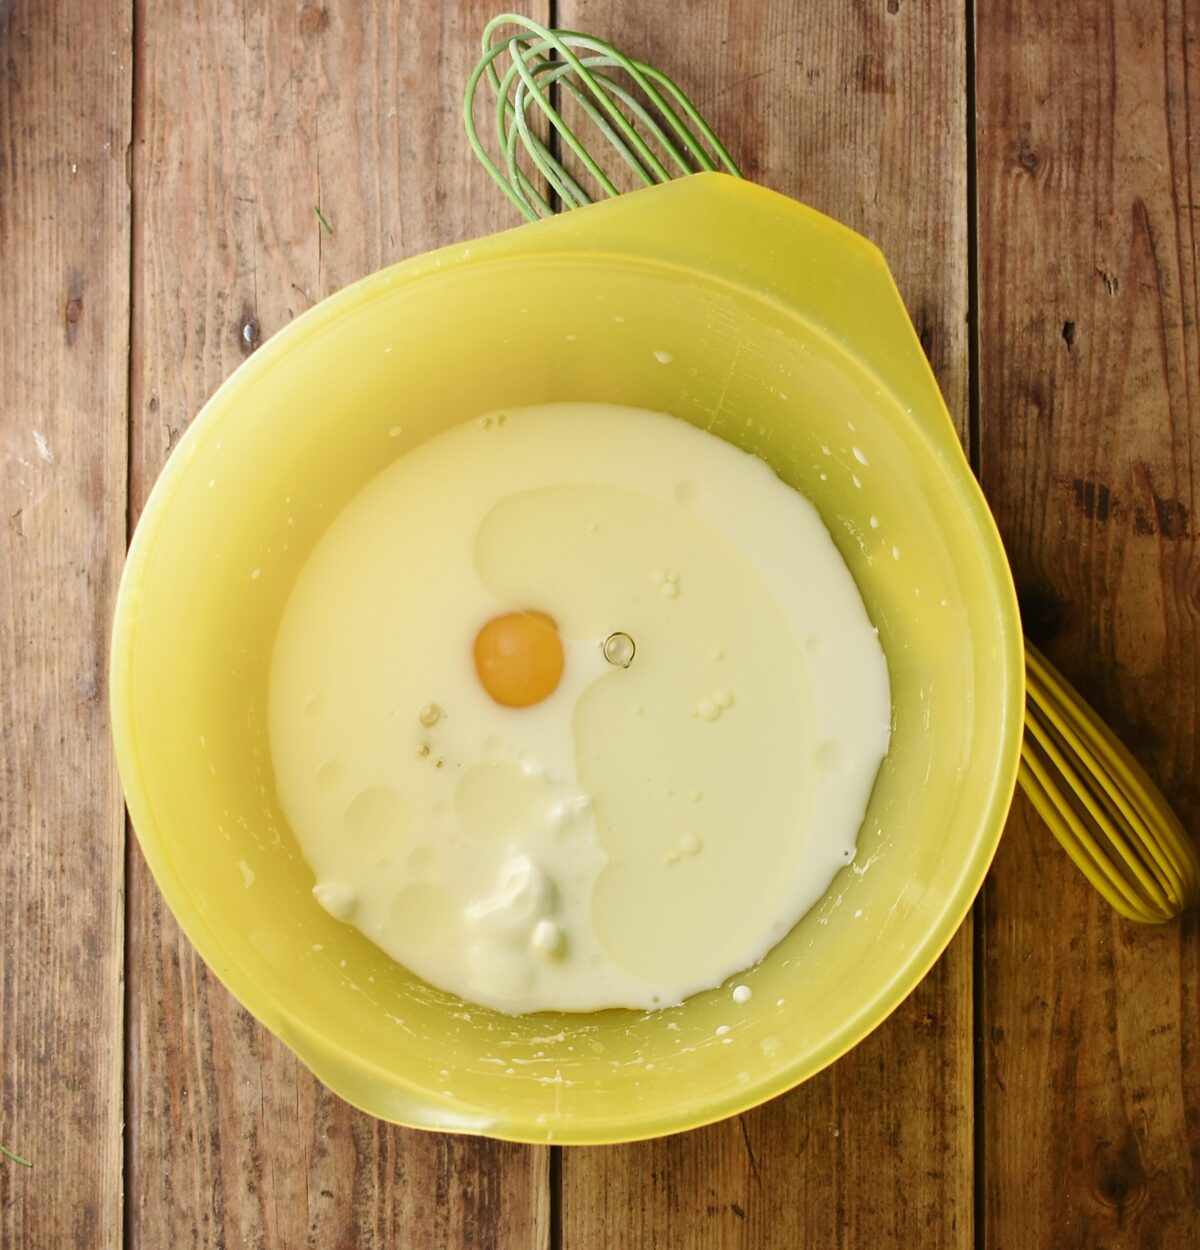 Milk and egg in large yellow bowl with green whisk to the right.